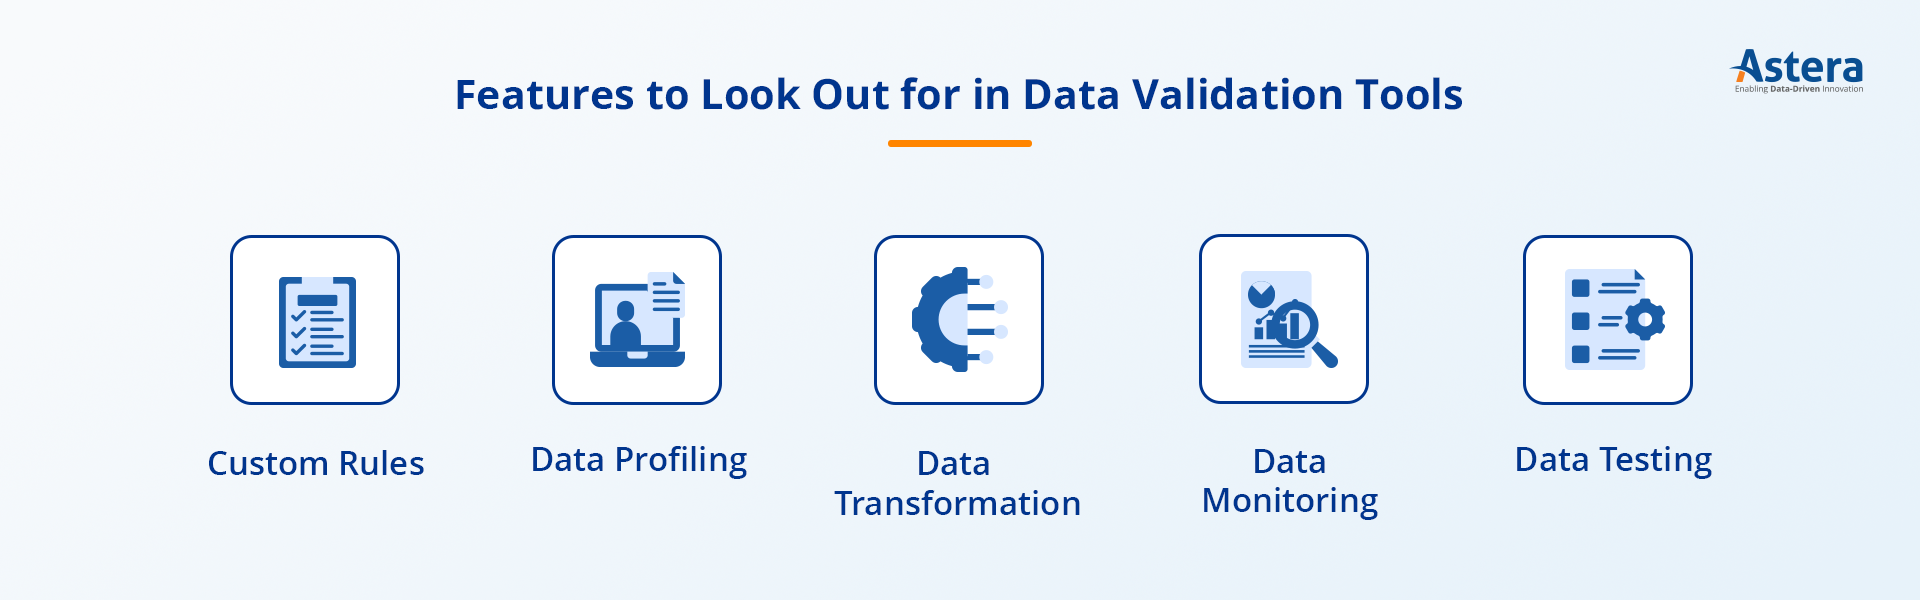 Data validation tools features